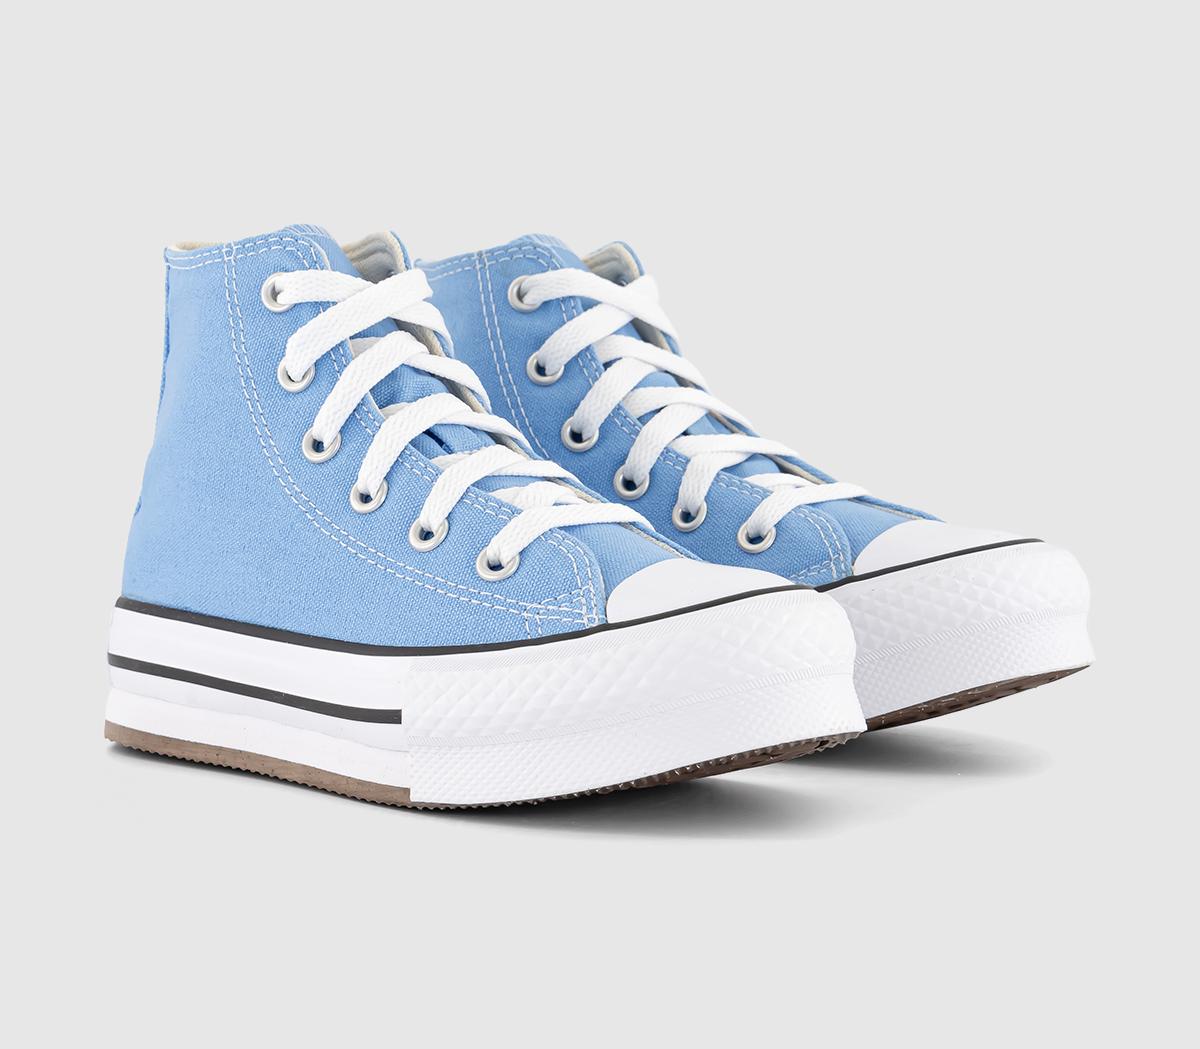 Converse Kids All Star Eva Lift Hi Youth Trainers Light Blue White Black, 11 Youth